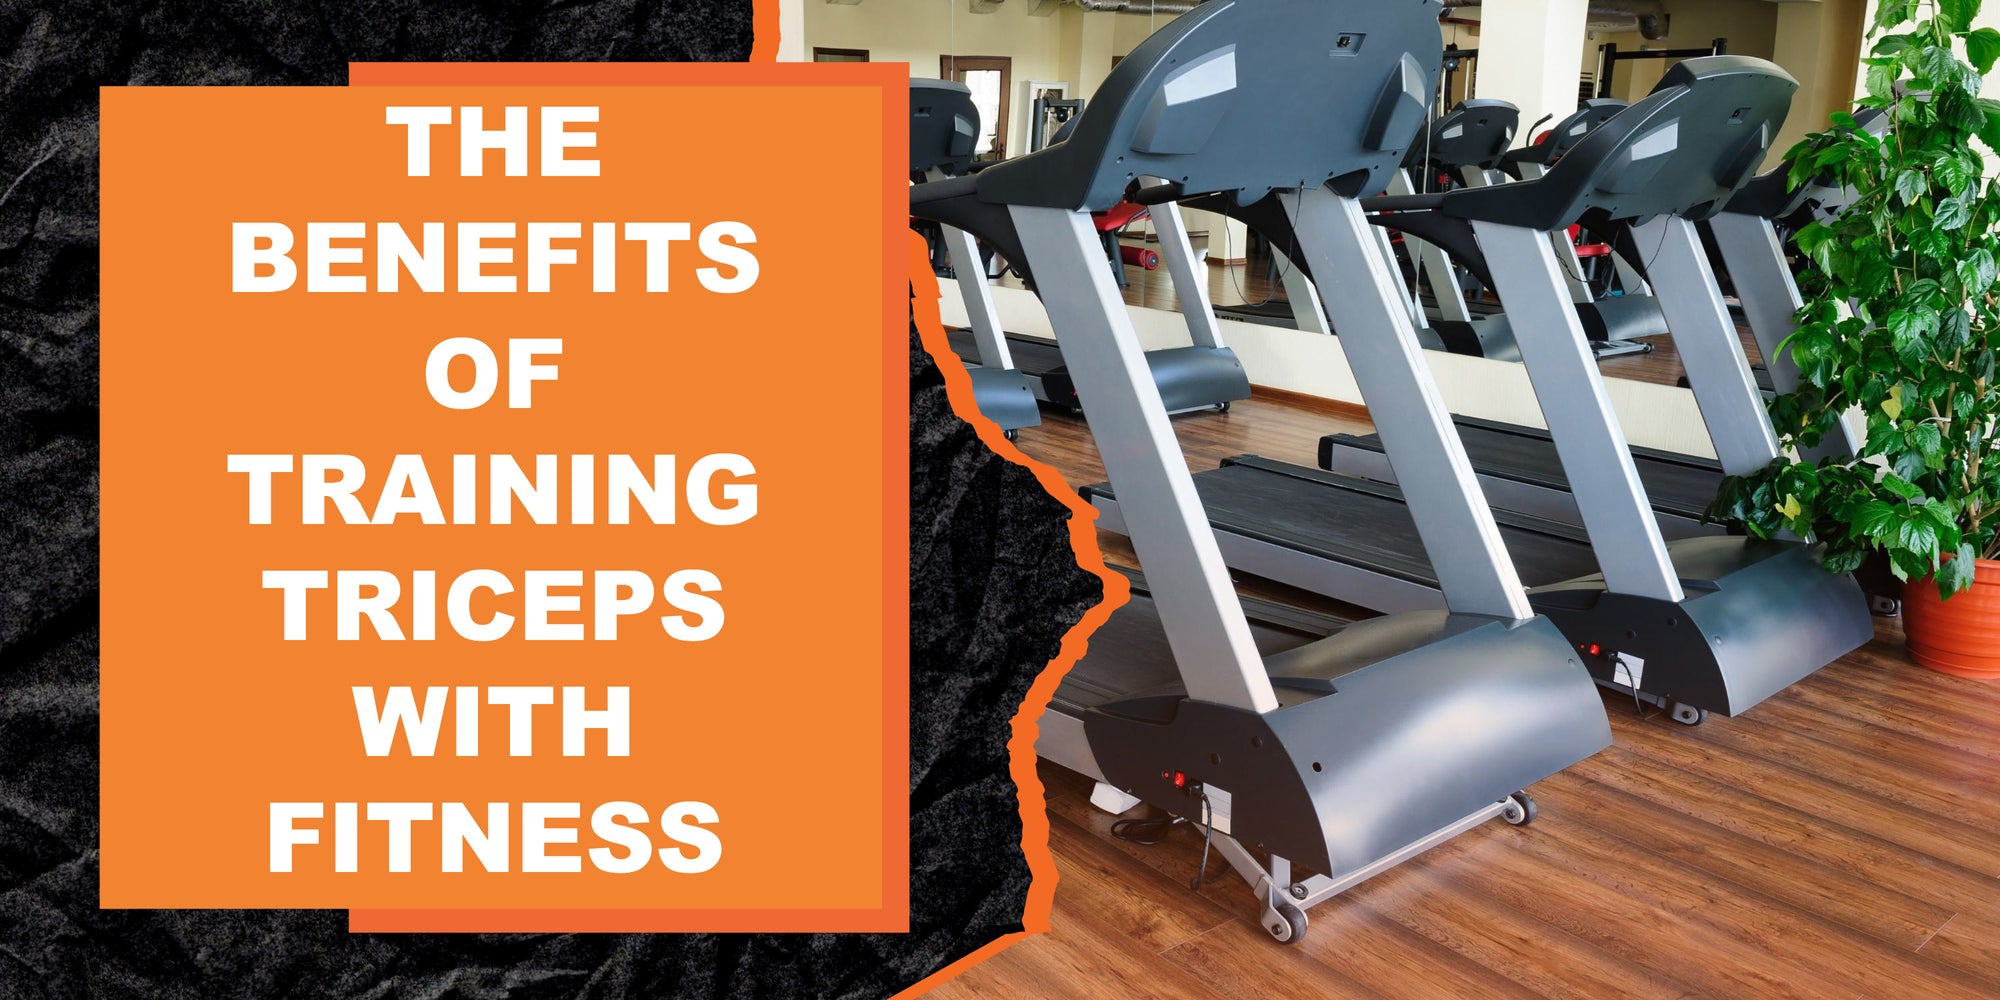 The Benefits of Training Triceps with Fitness Gear